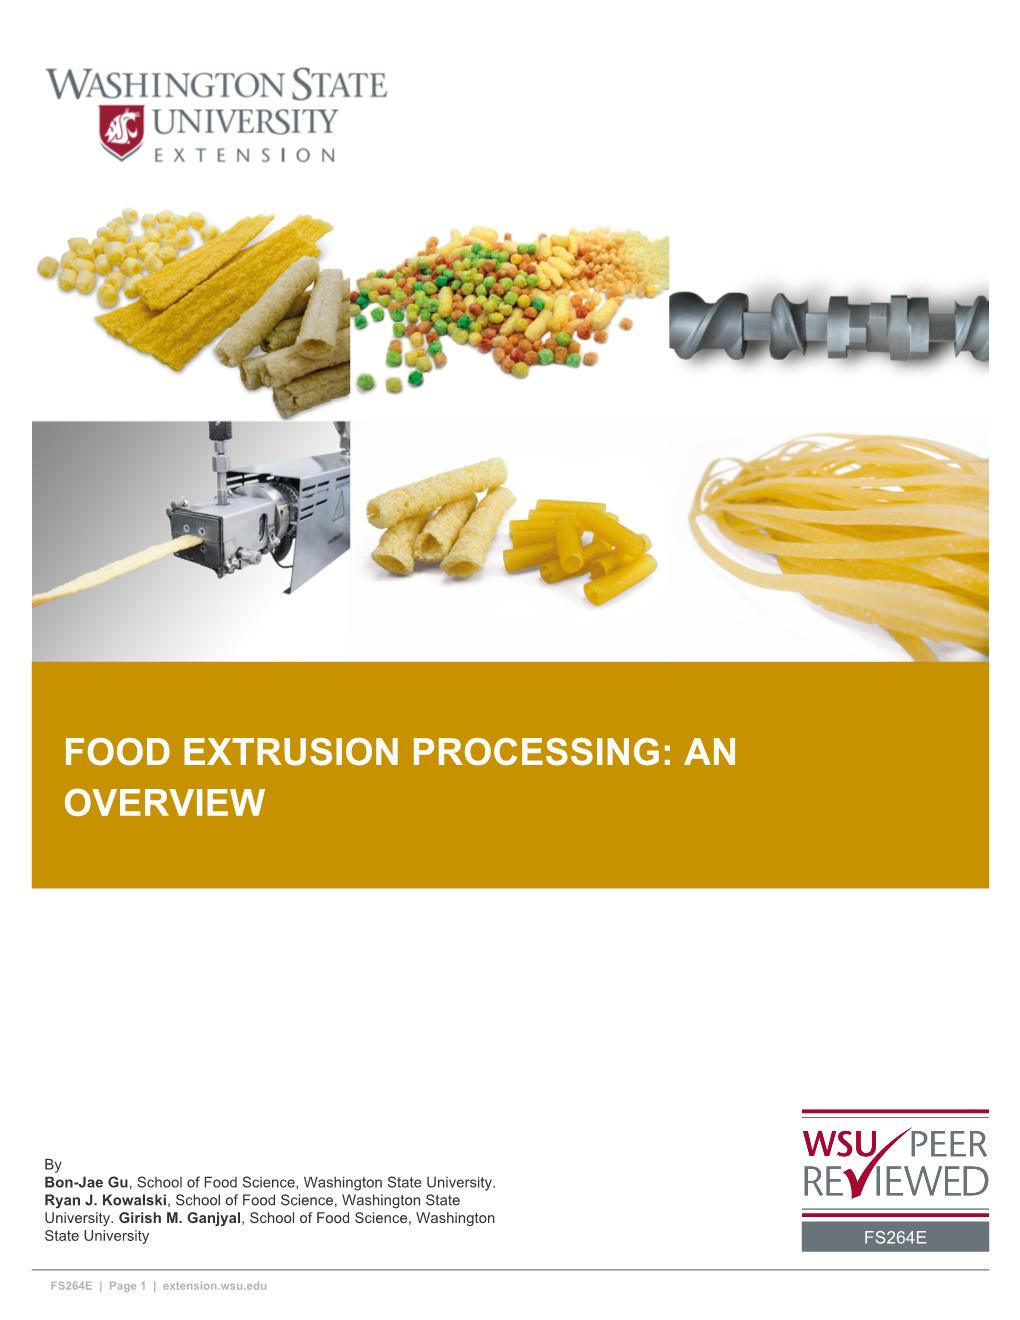 Food Extrusion Processing: an Overview